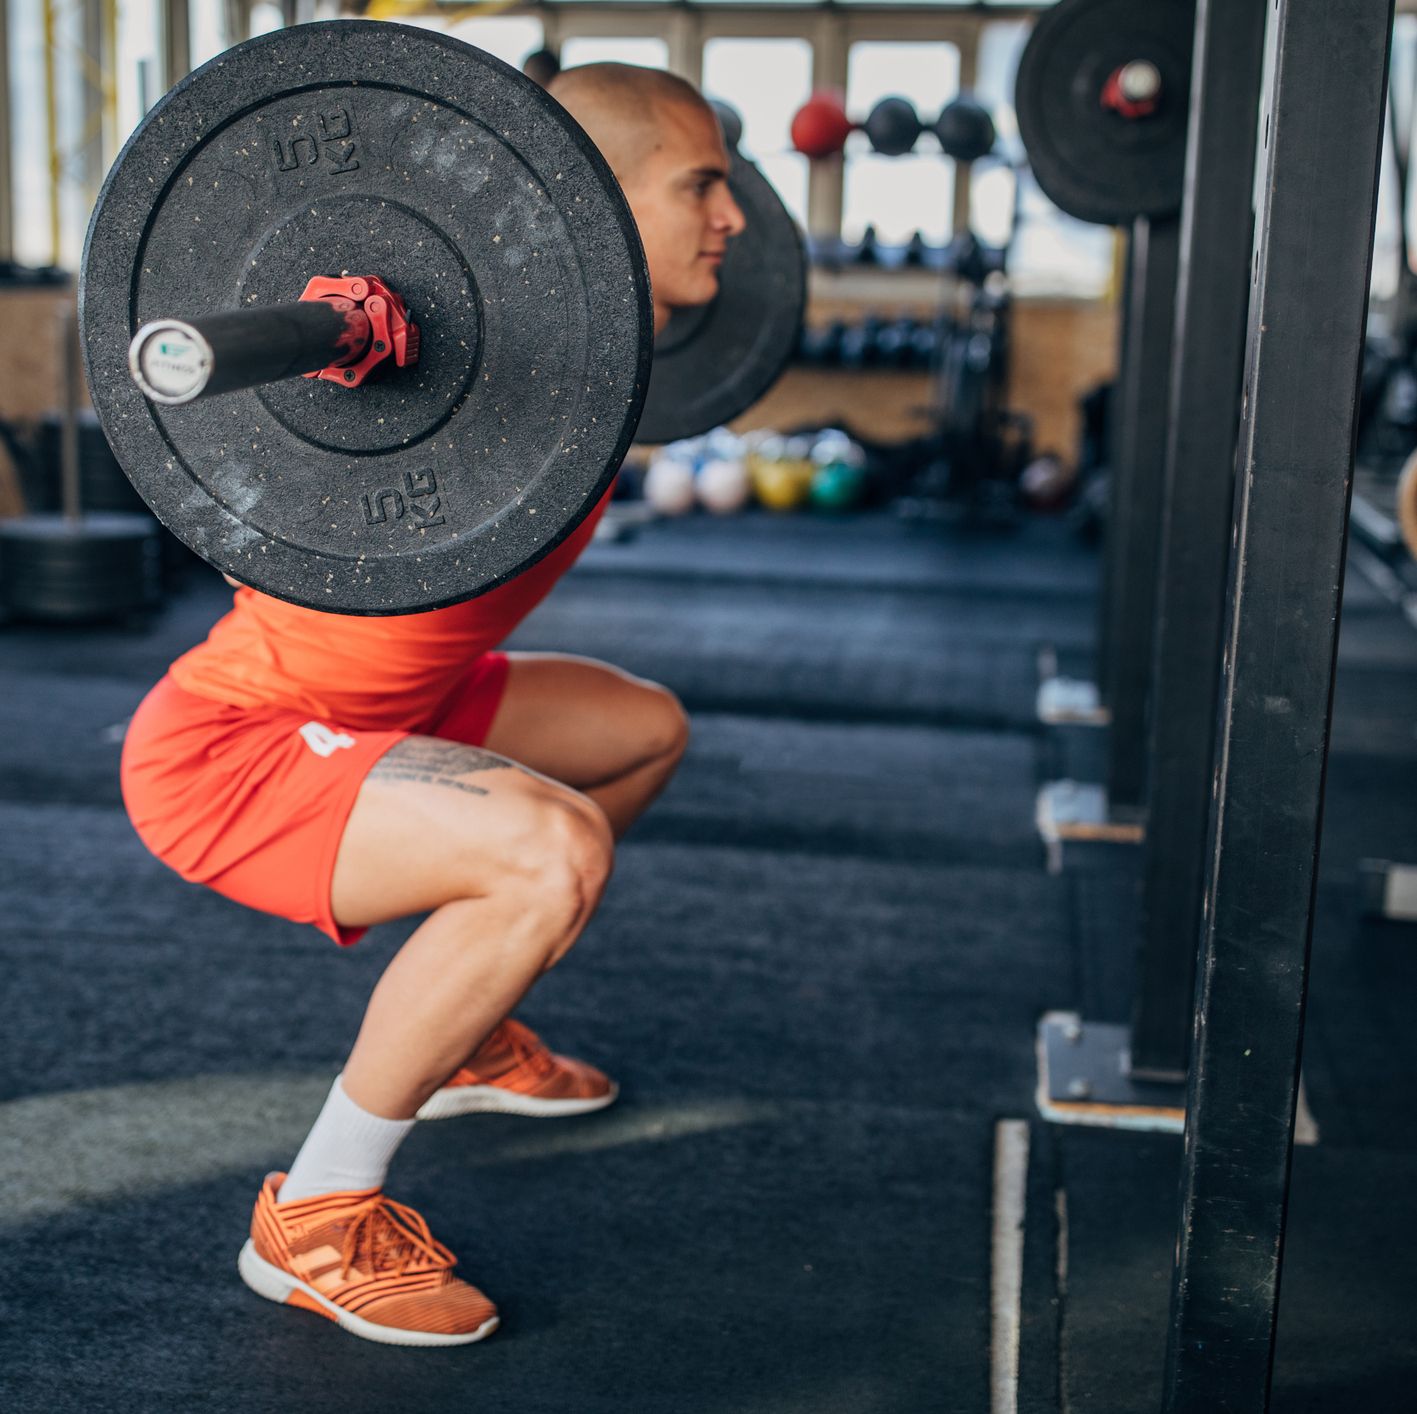 5 Exercises That Will Make You a Stronger Squatter